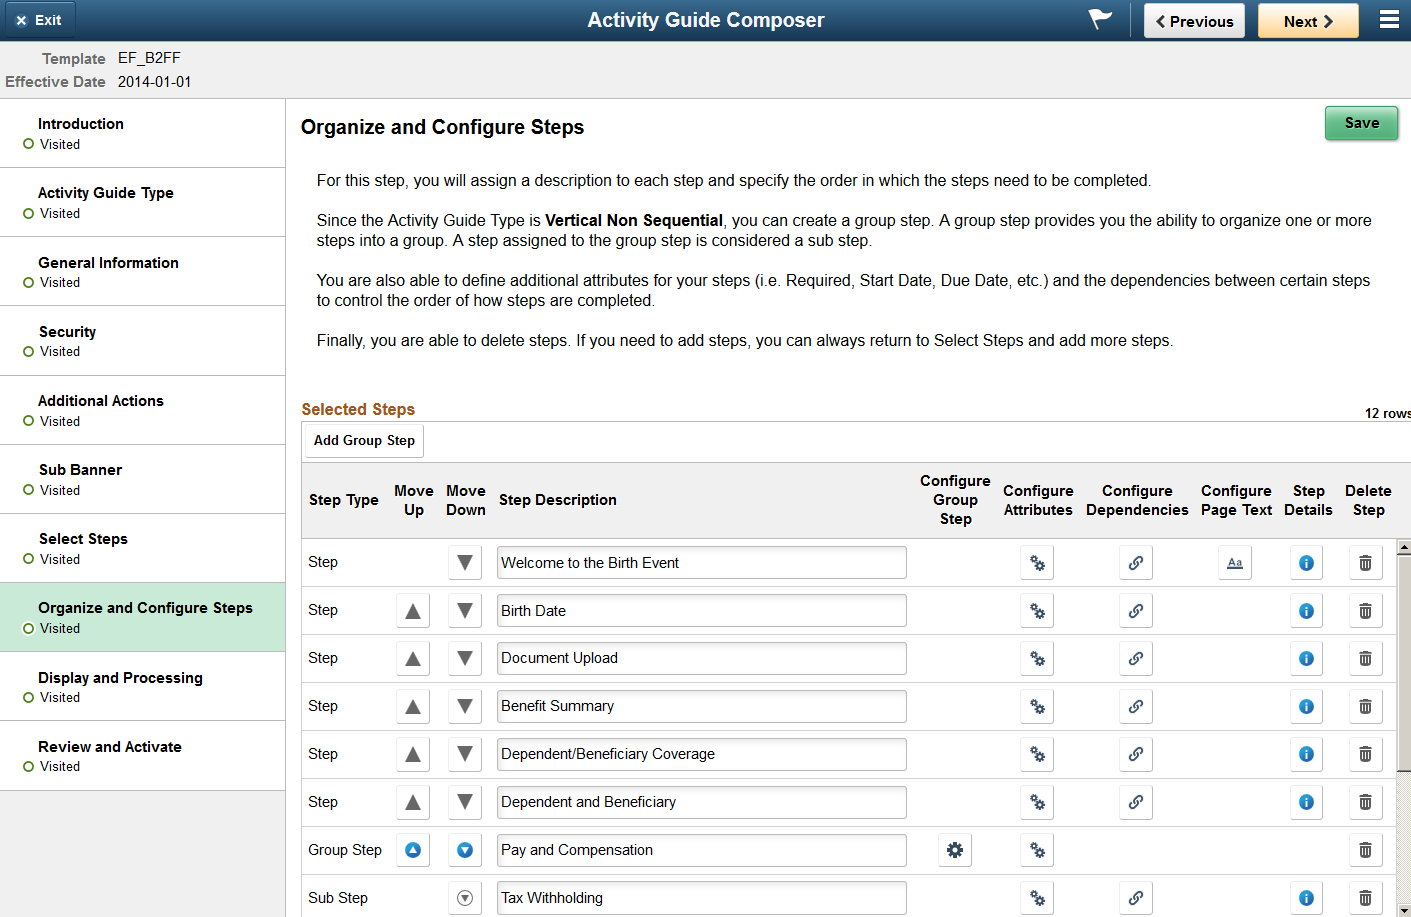 Activity Guide Composer - Organize and Configure Steps page